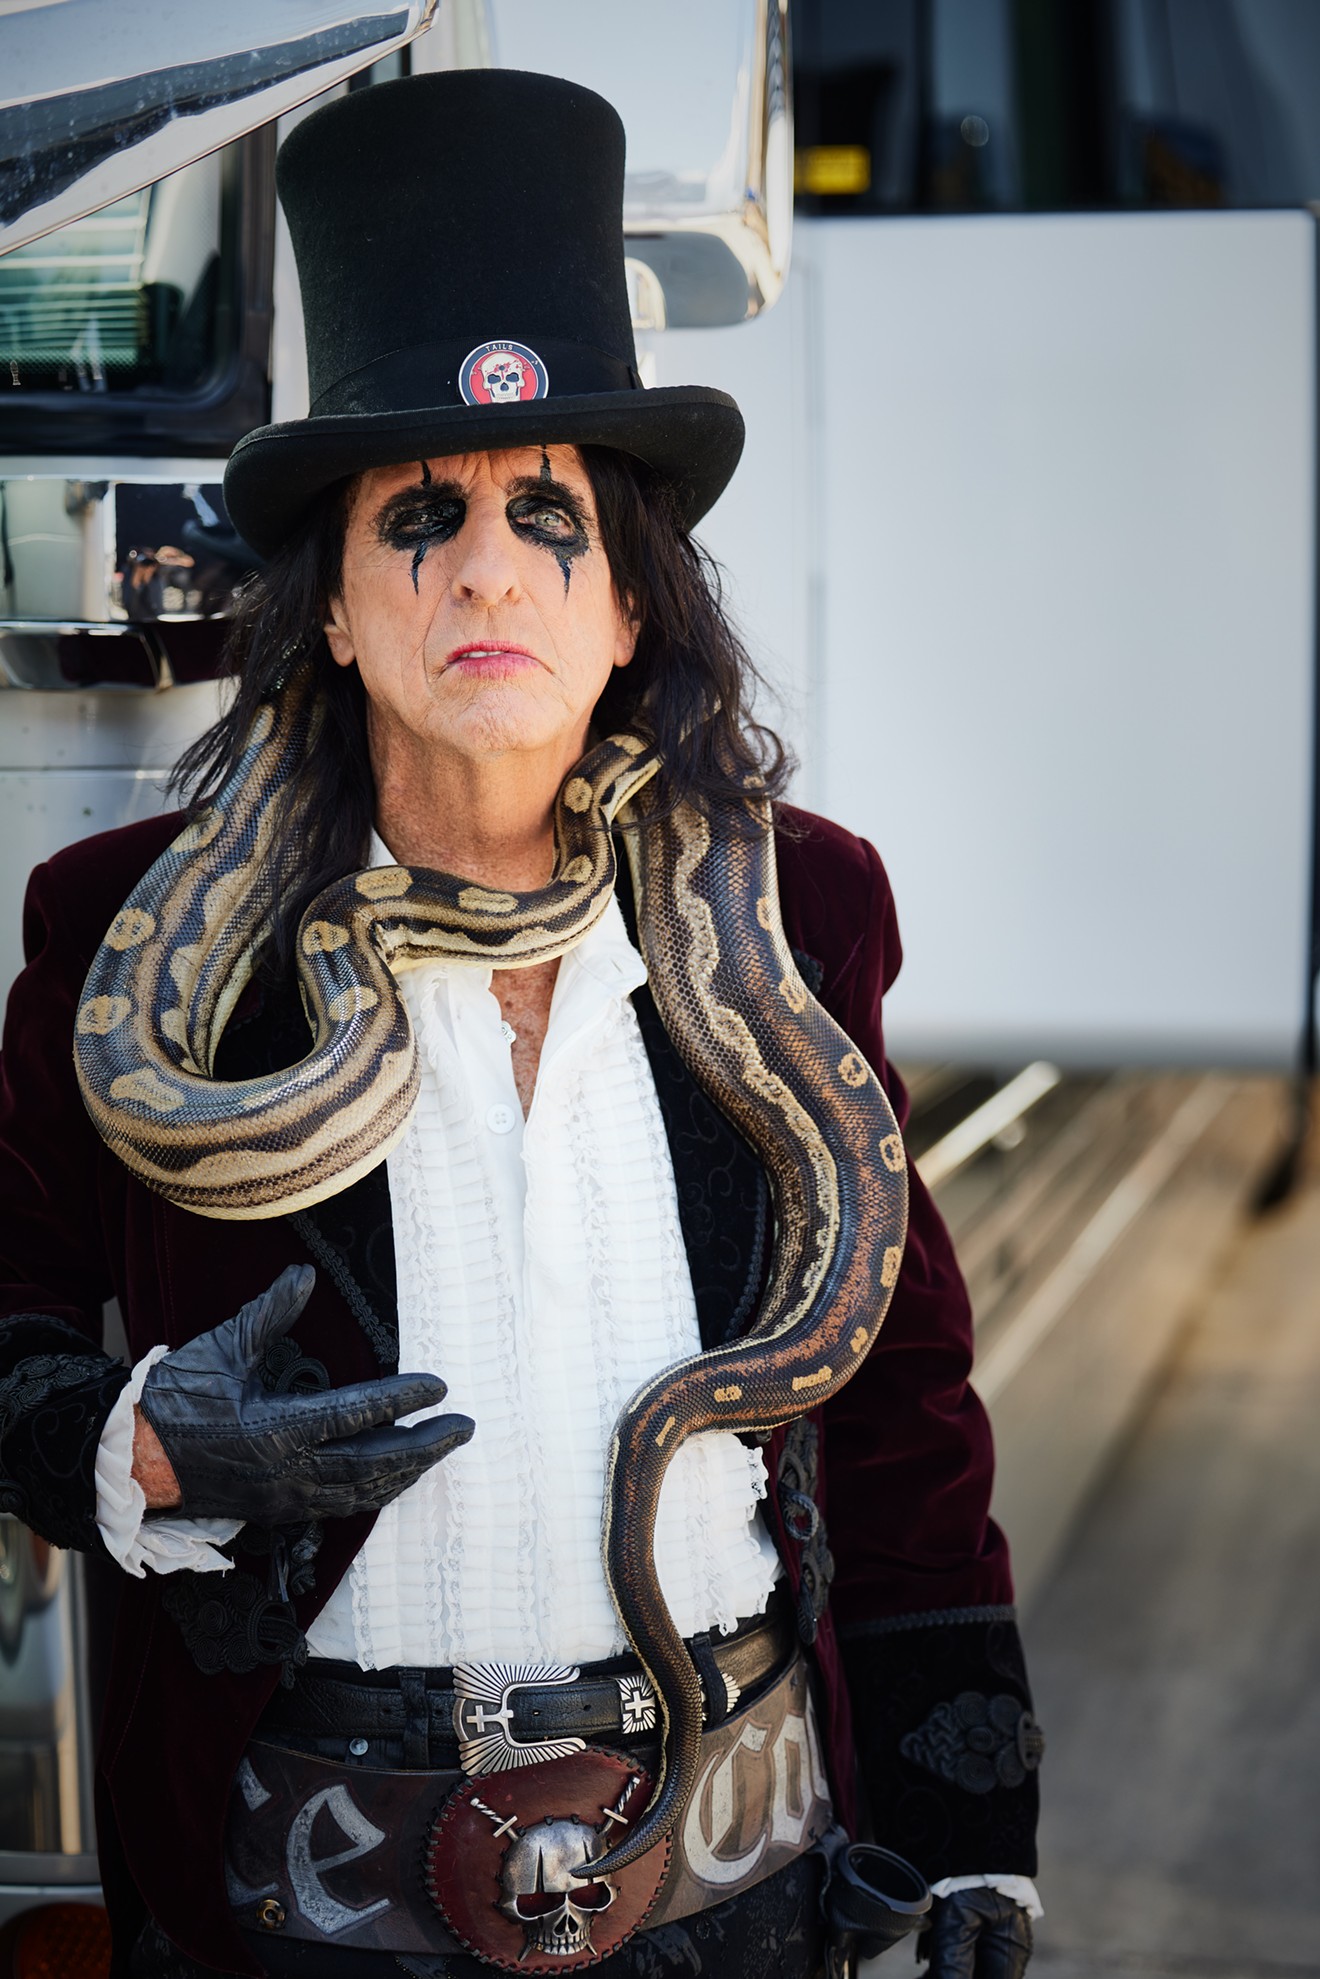 To Alice Cooper, horror is comedy. Comedy = tragedy + time. Time is of the essence. “Essence” was an episode of The X-Files. Alice Cooper and Rob Zombie wrote a song for The X-Files. Rob Zombie and Alice Cooper are playing Dallas on Thursday.